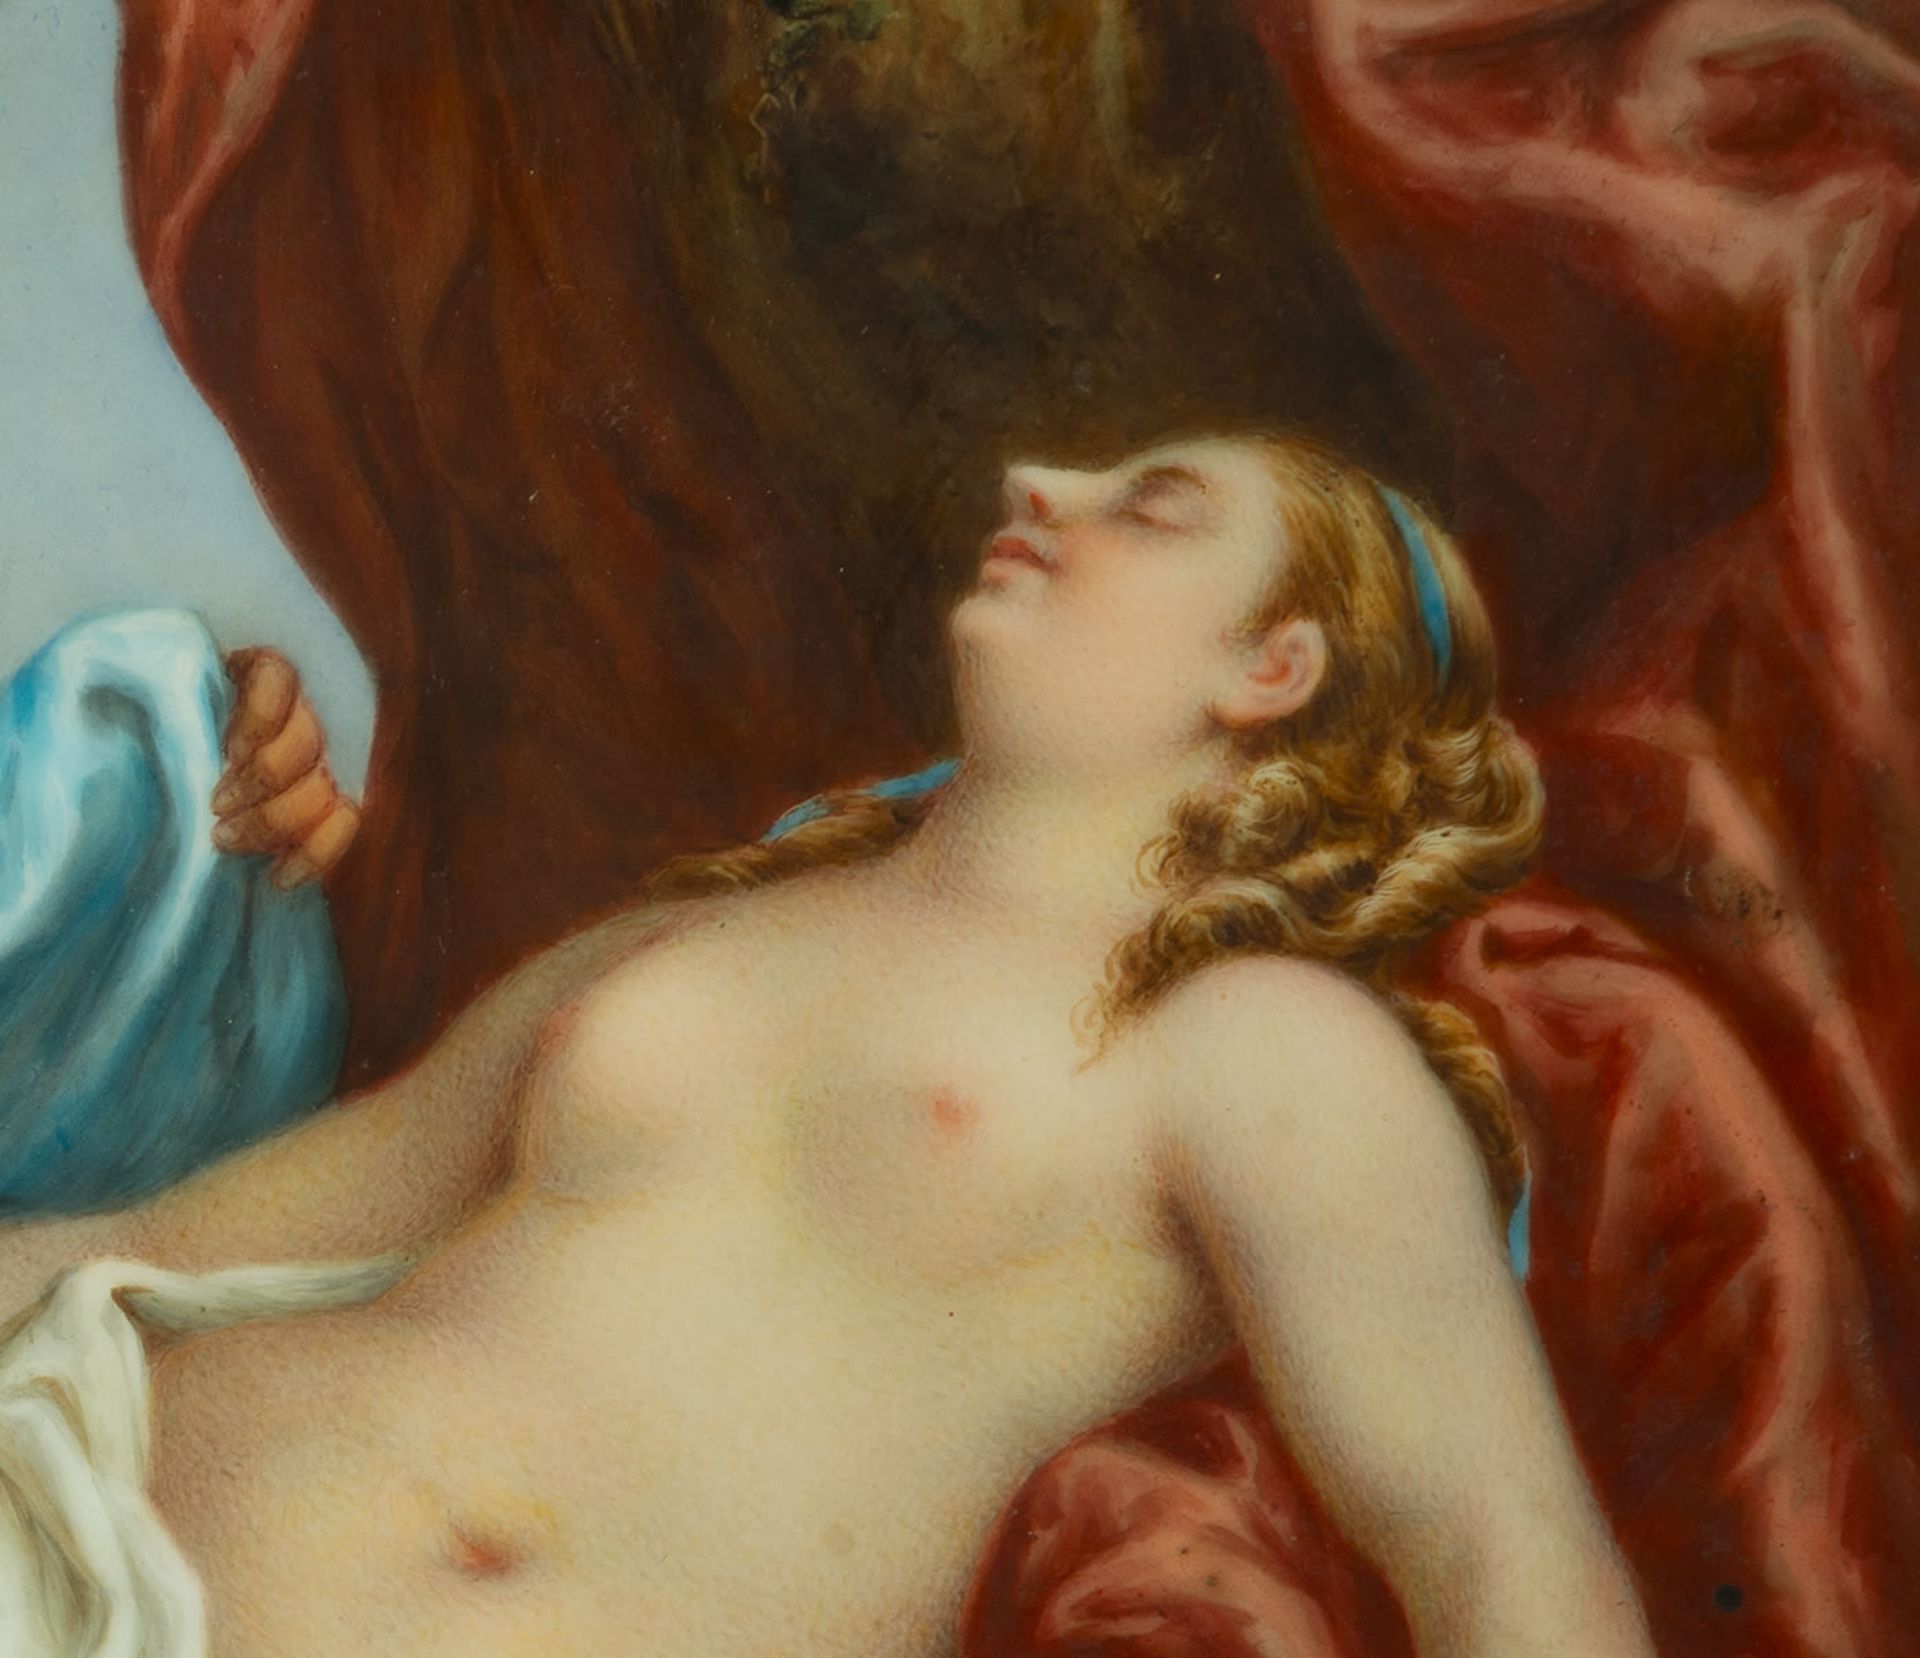 Faun Next to Venus - Hand-enamelled and signed Porcelain Plate, Royal KPMG, 19th century - Image 3 of 8